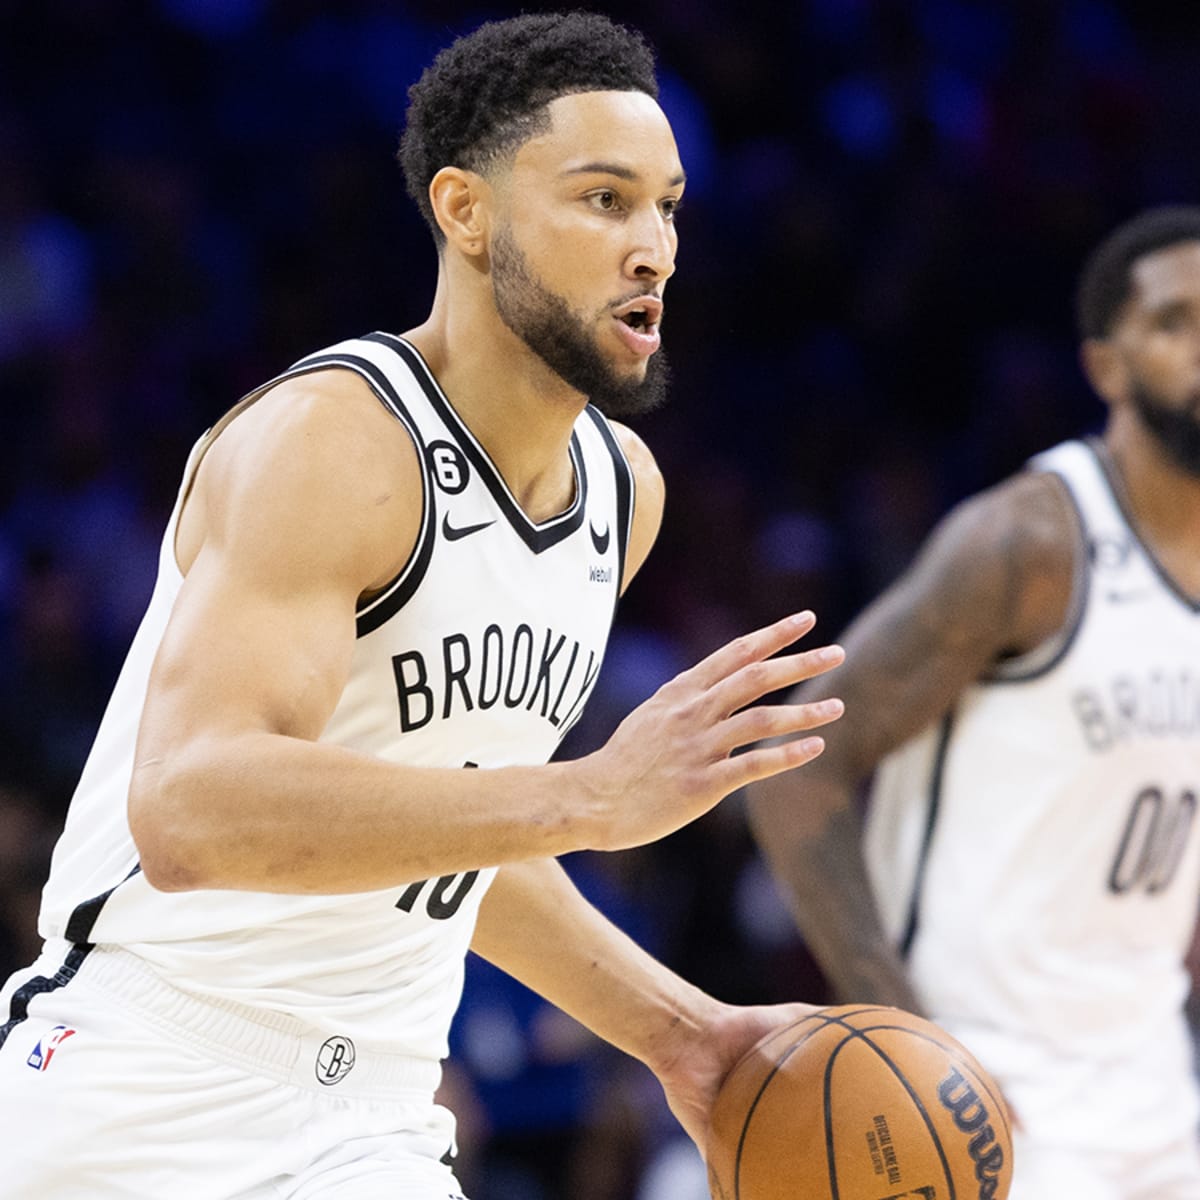 Nets fall to shorthanded 76ers in Ben Simmons' return game